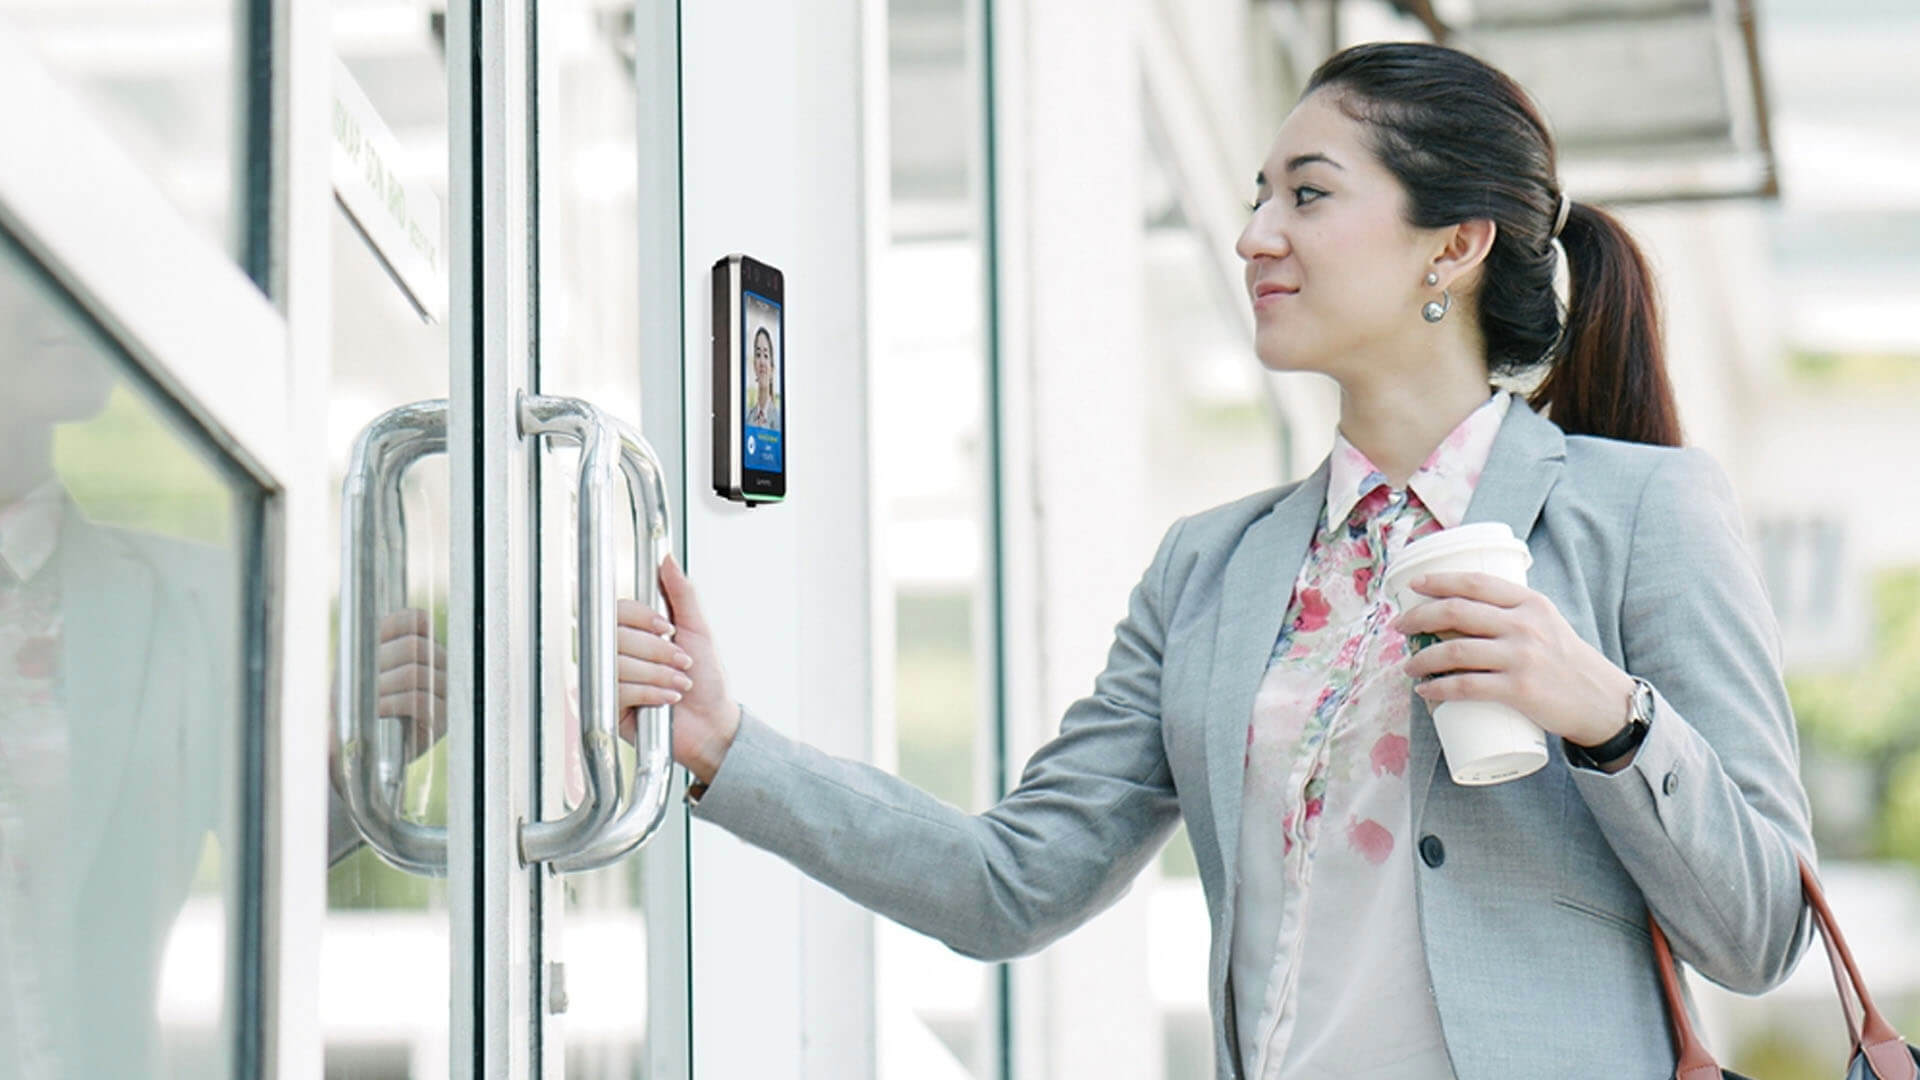 An employee using a physical access control system (PACS)